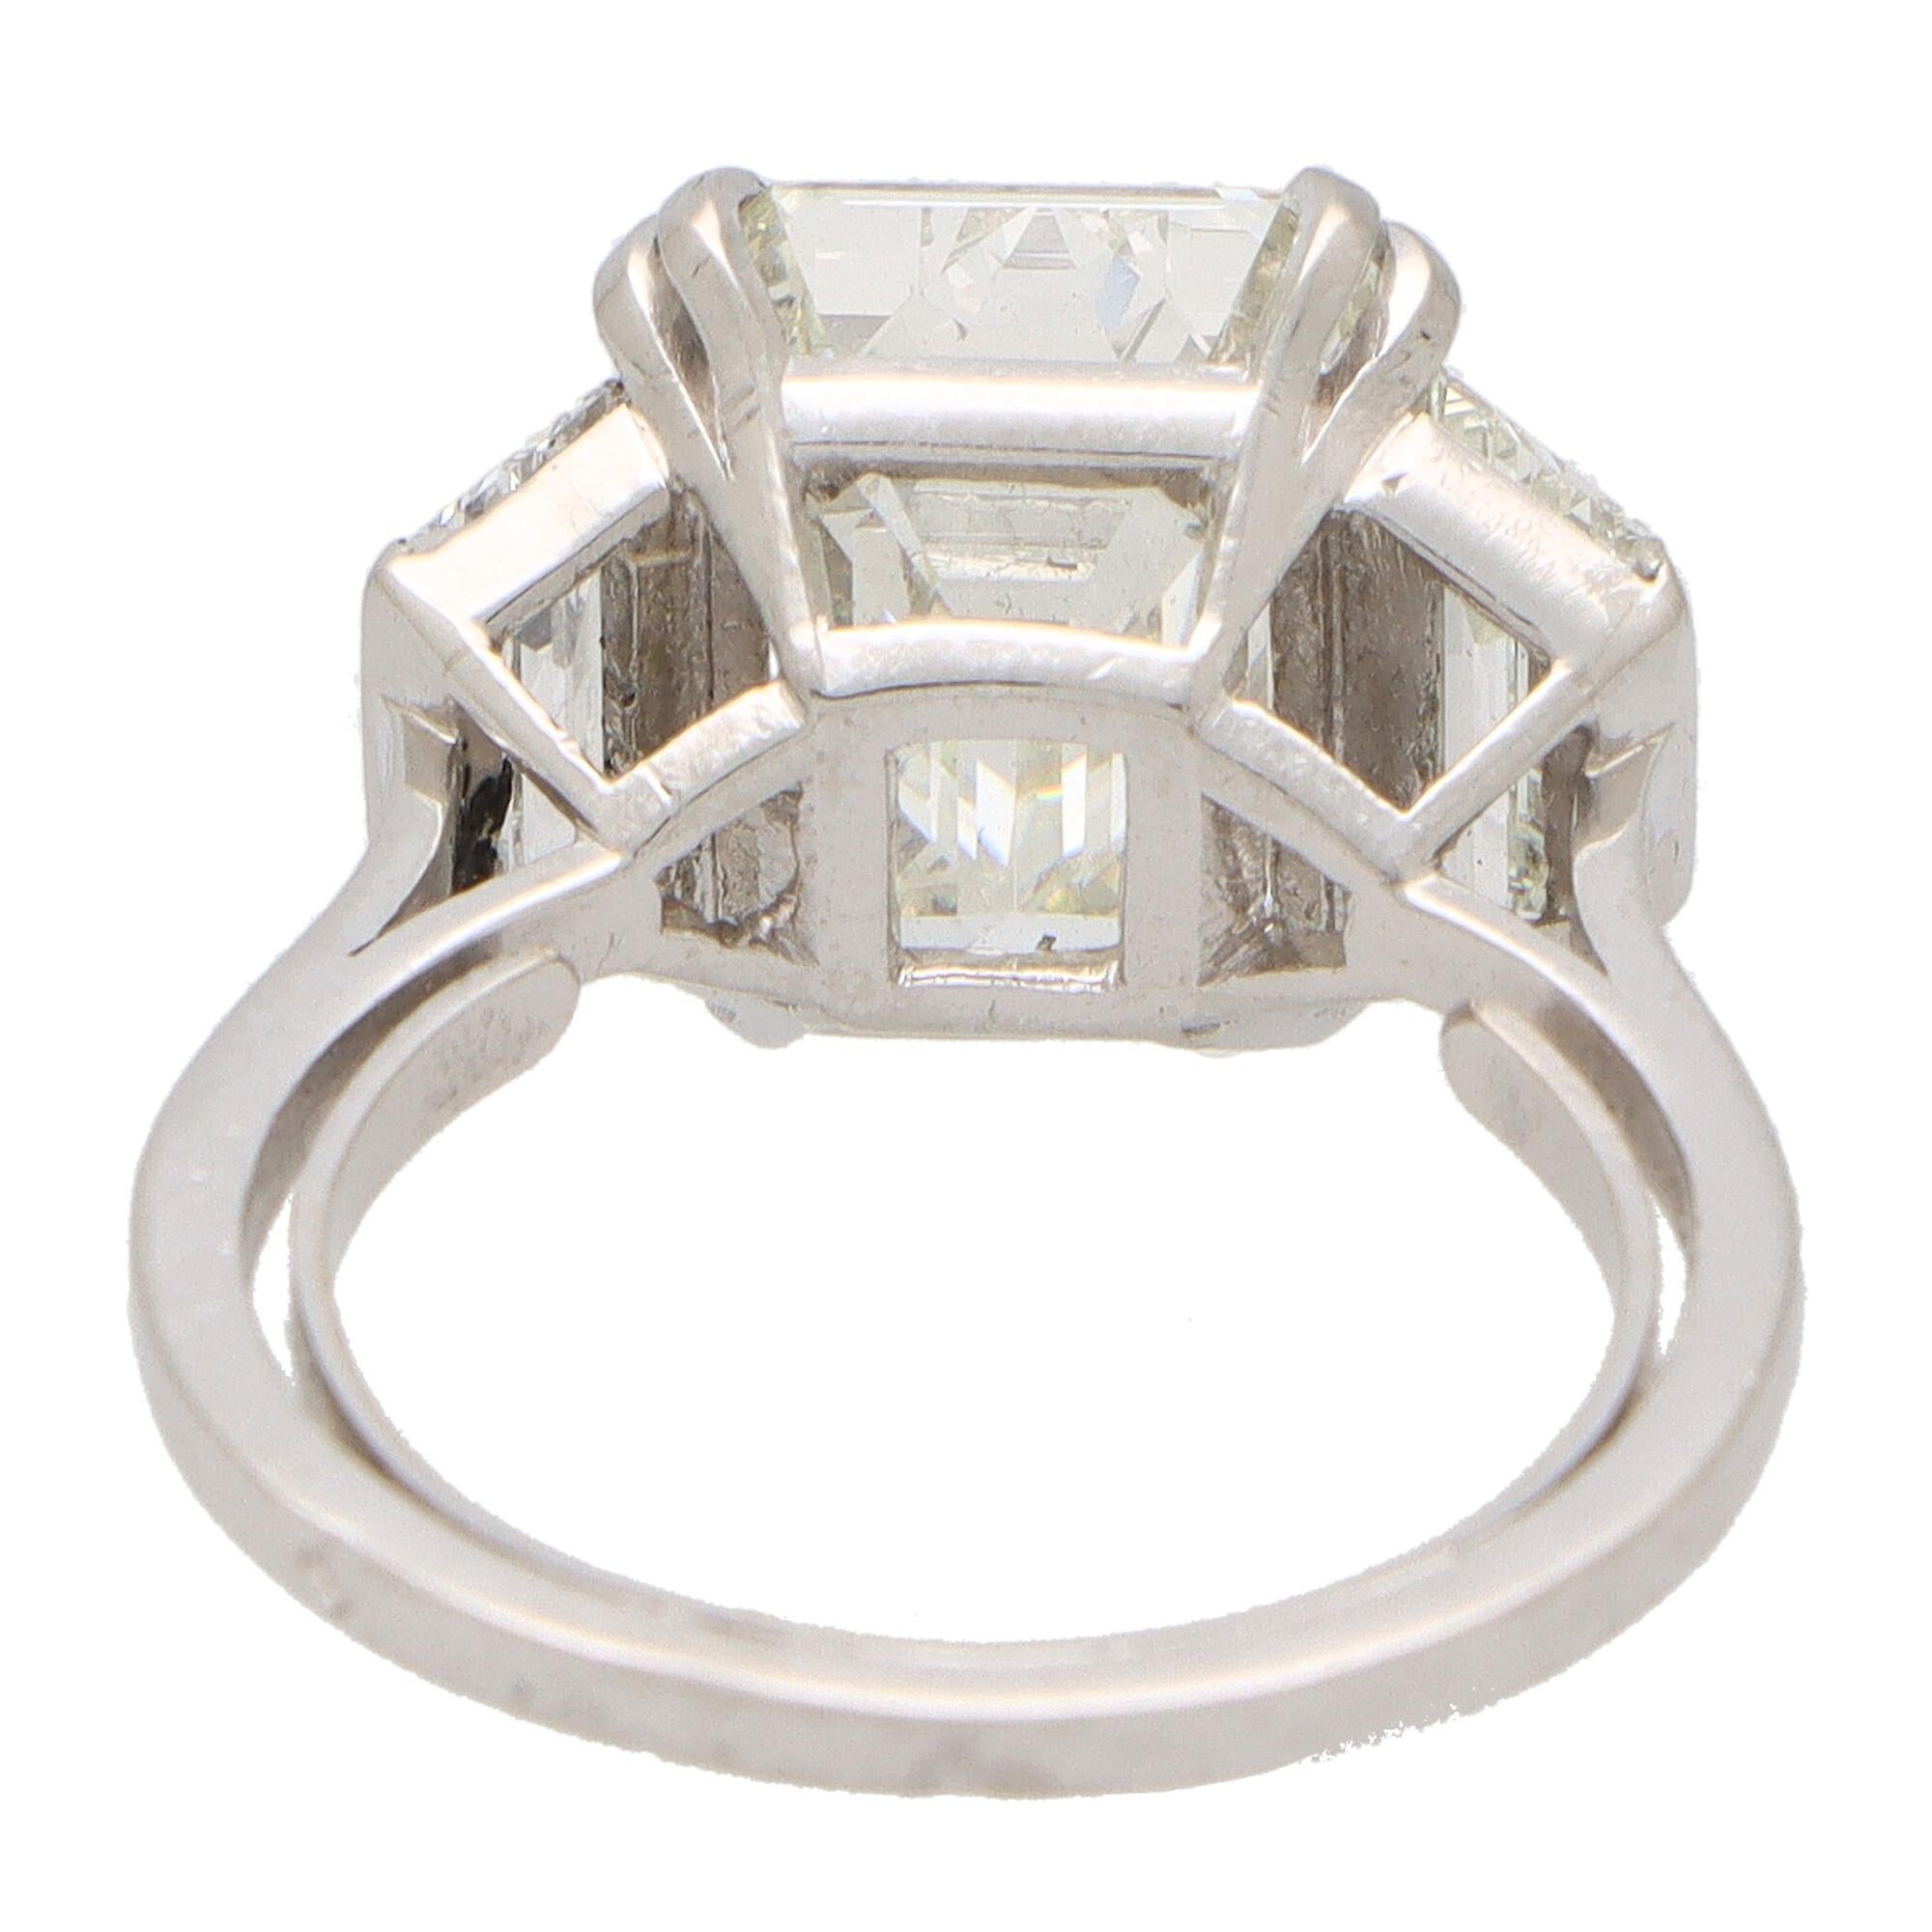 Art Deco Style GIA Certified Emerald Cut Diamond Ring Set in Platinum For Sale 2